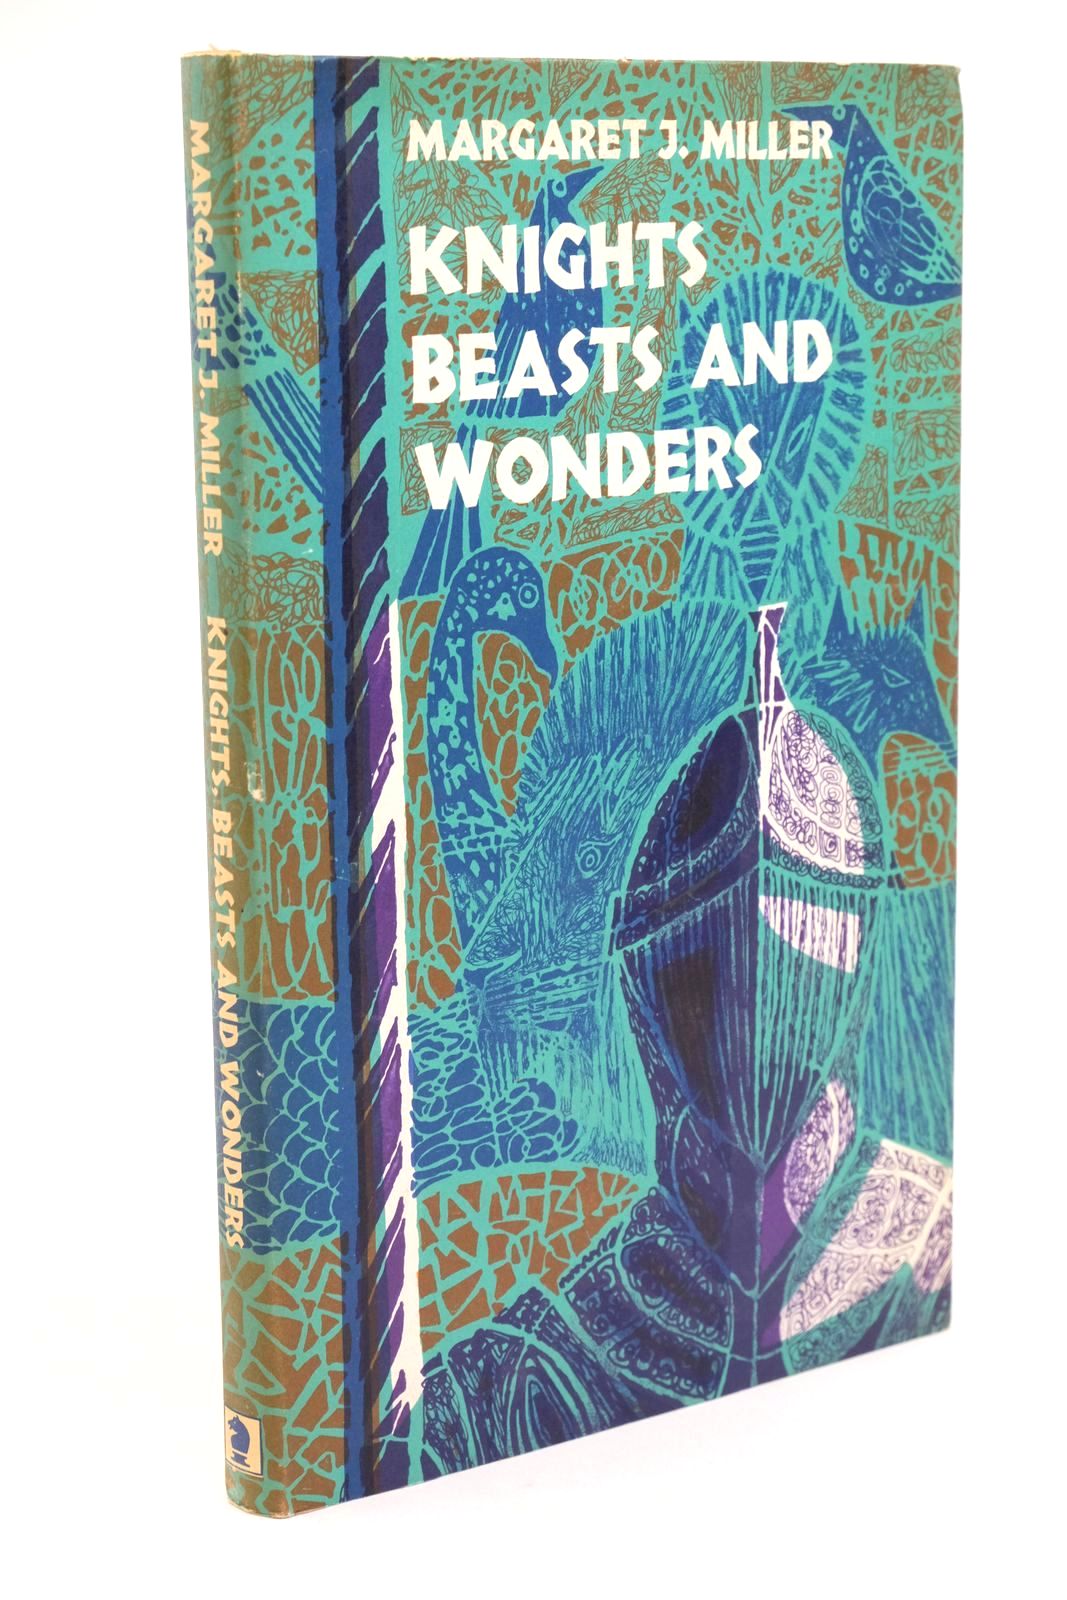 Photo of KNIGHTS, BEASTS AND WONDERS written by Miller, Margaret J. illustrated by Keeping, Charles published by Brockhampton Press (STOCK CODE: 1323118)  for sale by Stella & Rose's Books